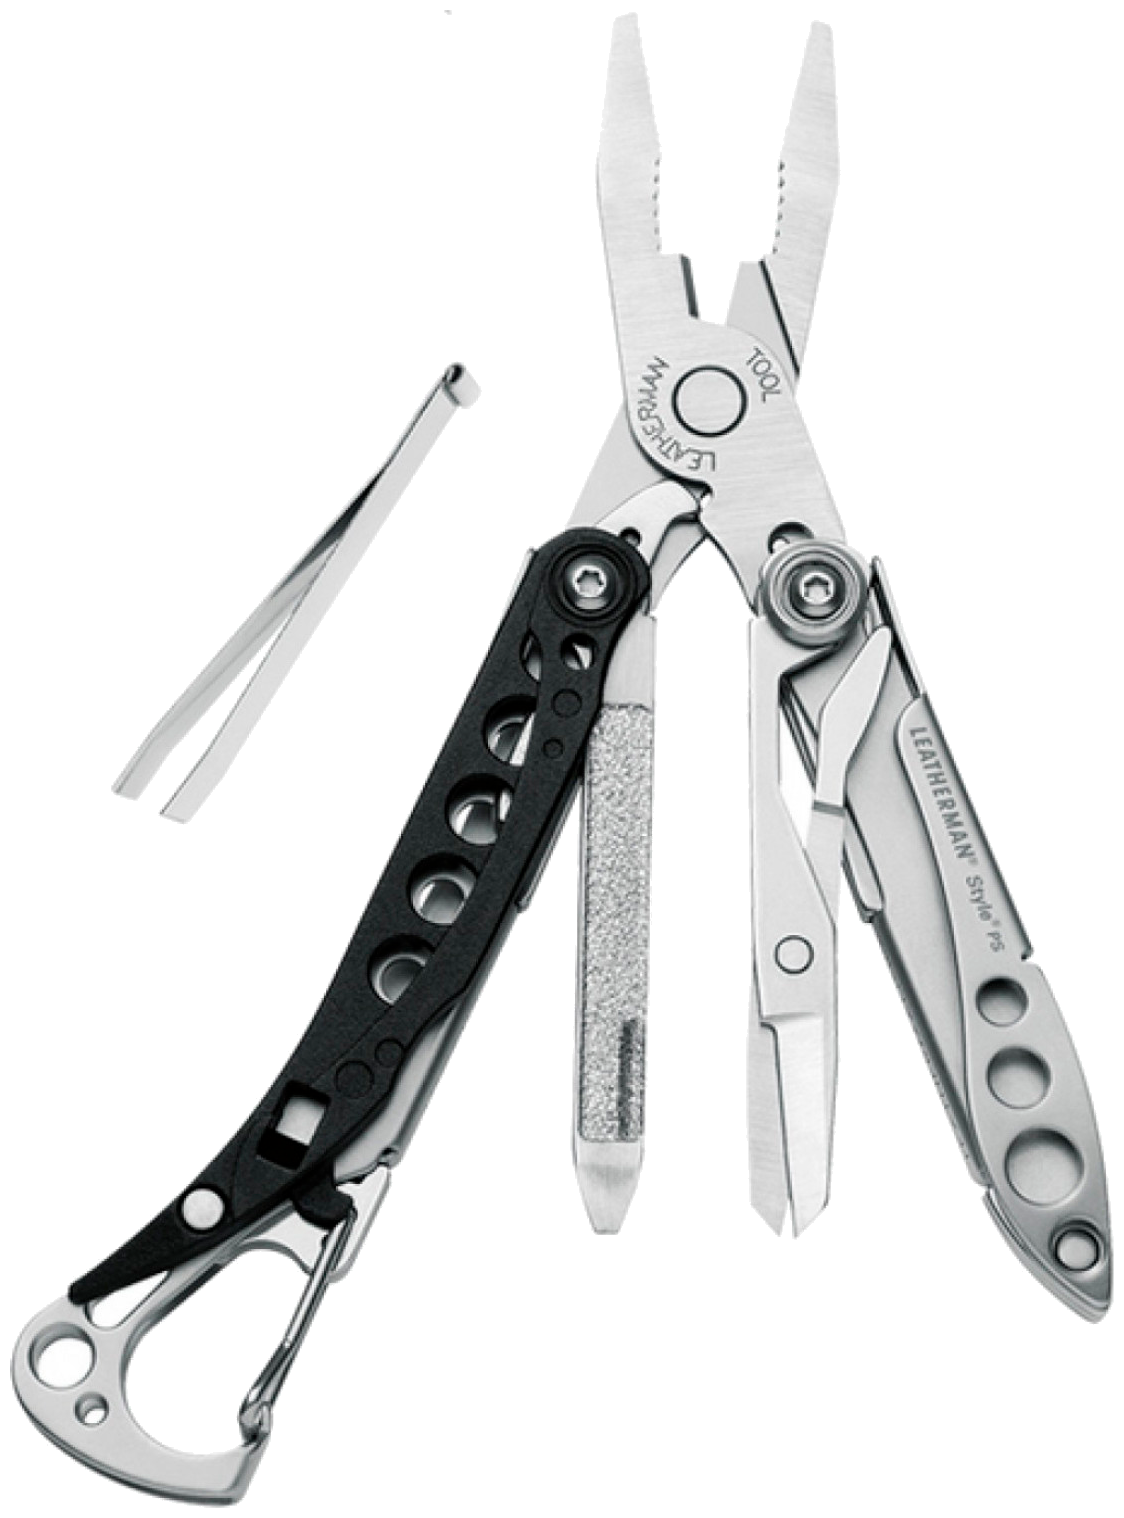  Leatherman Style PS, 8 